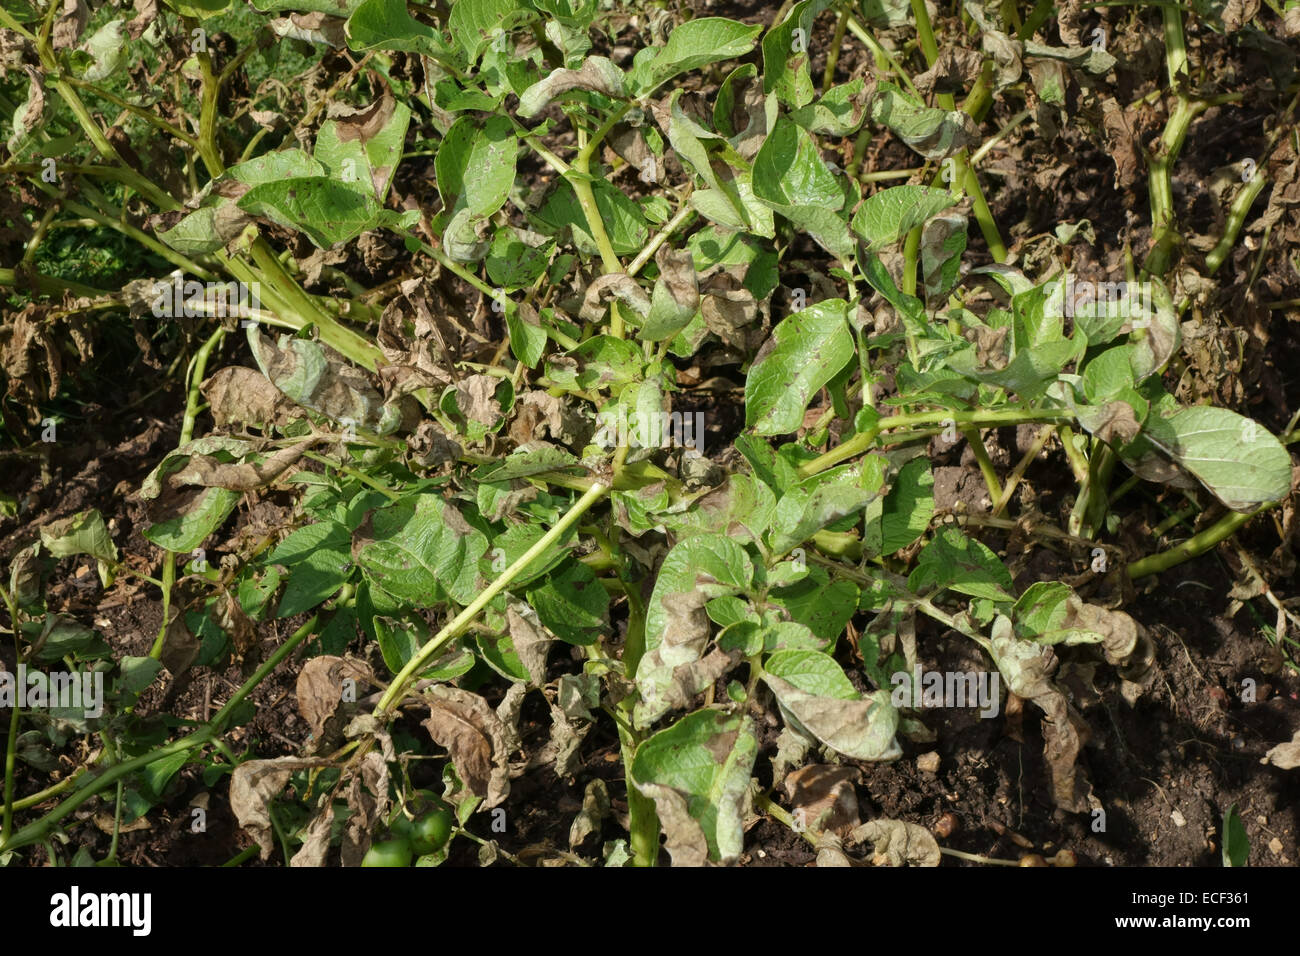 Potato late blight, Phytophthora infestans, damage to potato plants in a vegetable plot, Hampshire, August Stock Photo